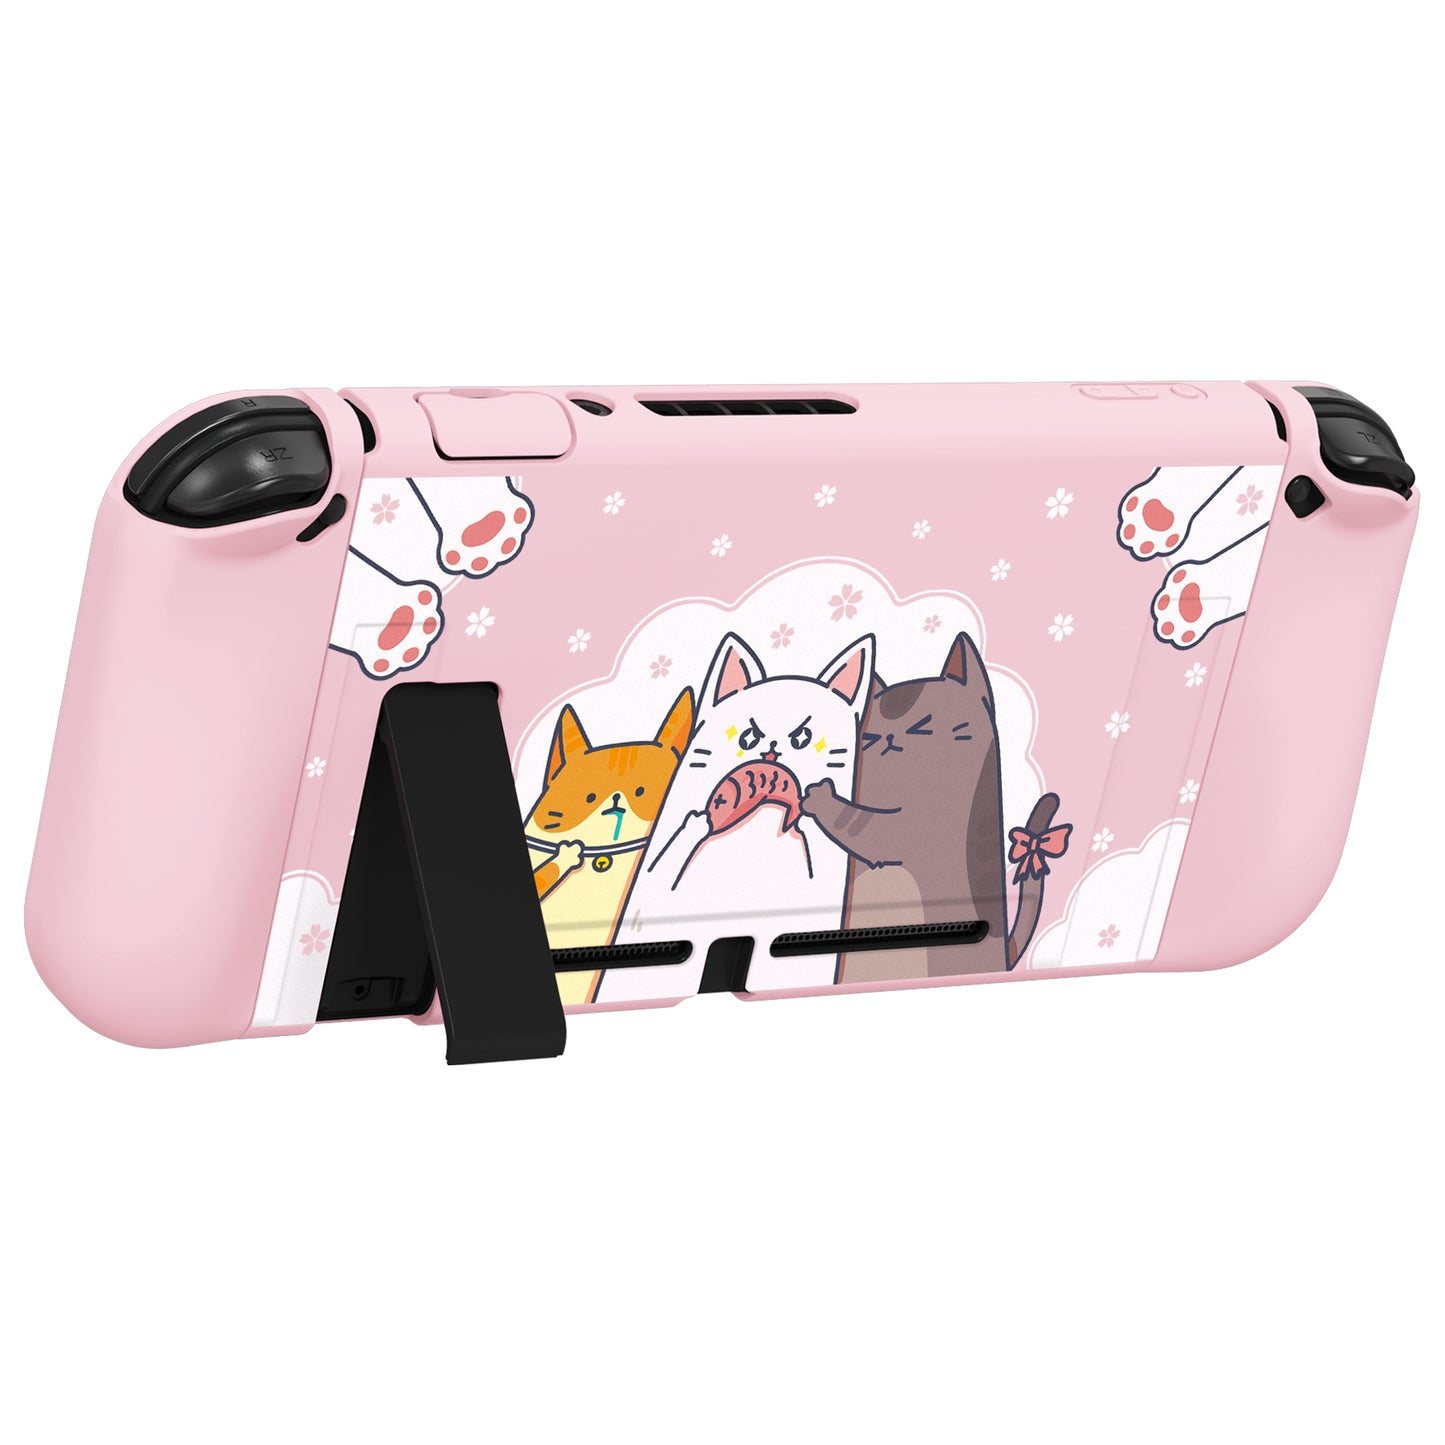 PlayVital ZealProtect Soft Protective Case for Nintendo Switch, Flexible Cover for Switch with Tempered Glass Screen Protector & Thumb Grips & ABXY Direction Button Caps - Hungry Kitties - RNSYV6044 playvital